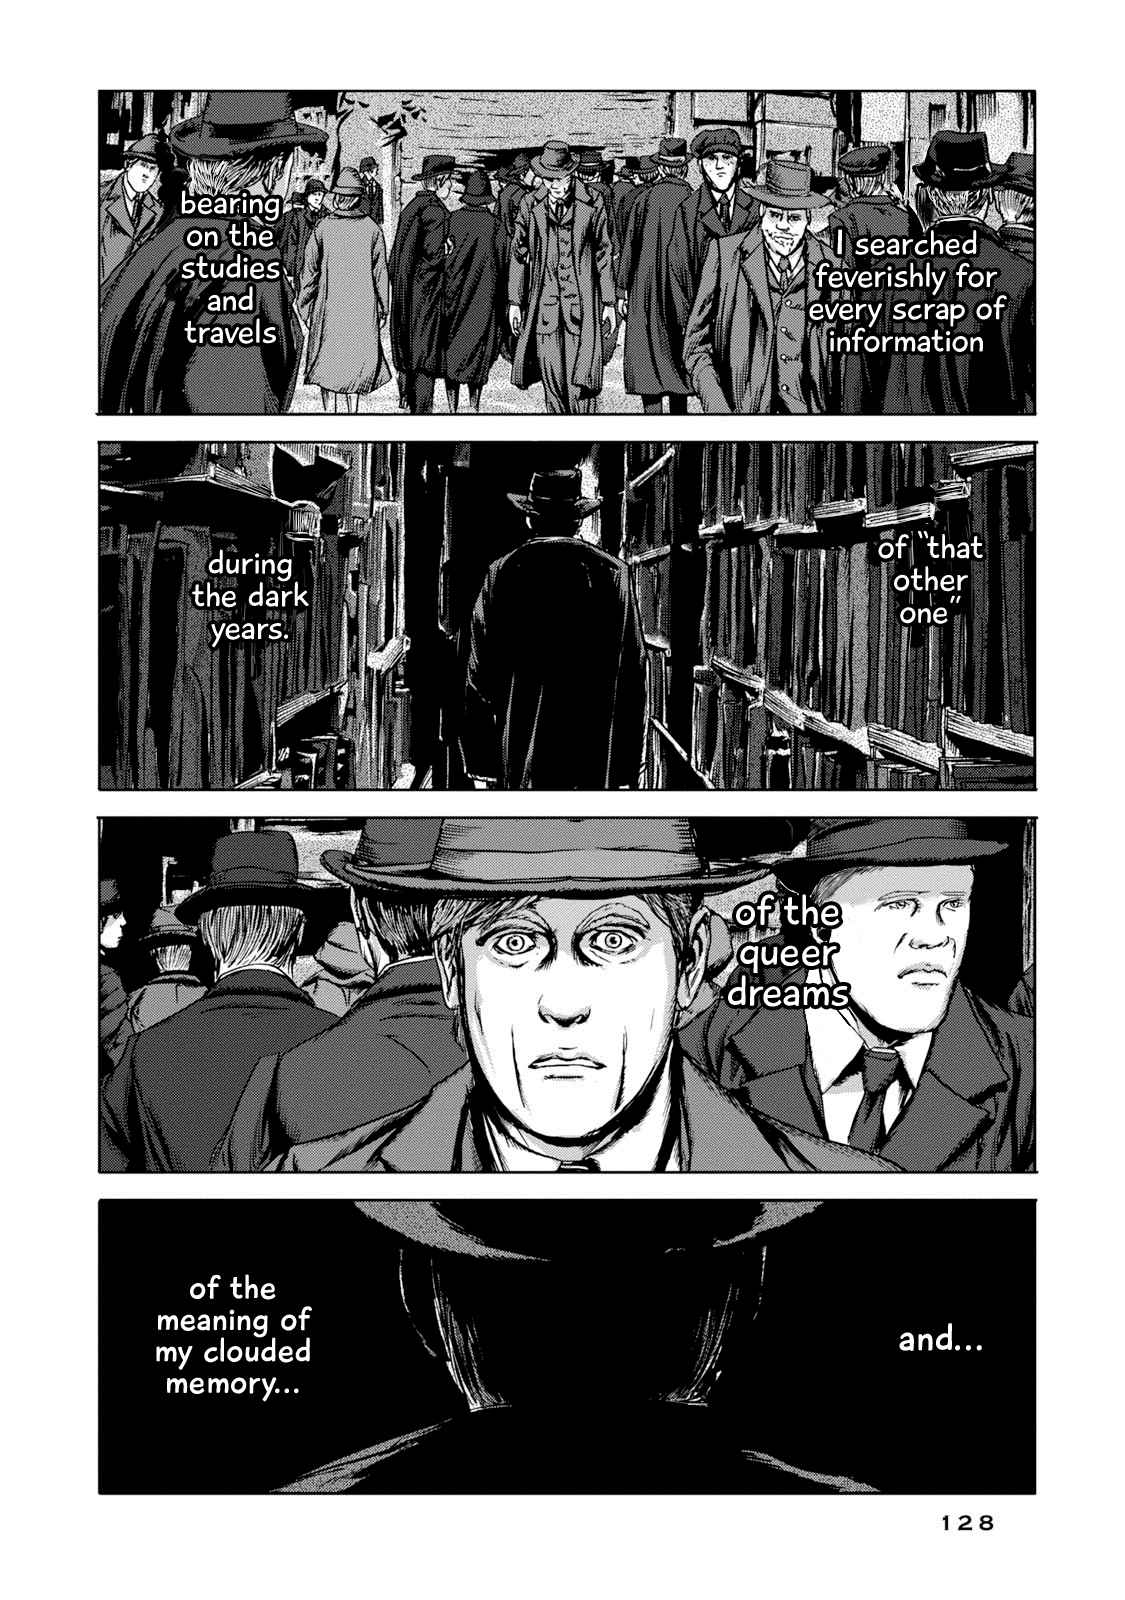 H.P. Lovecraft's The Shadow out of Time Vol. 1 Ch. 5 Some Unholy Sort of Exchange